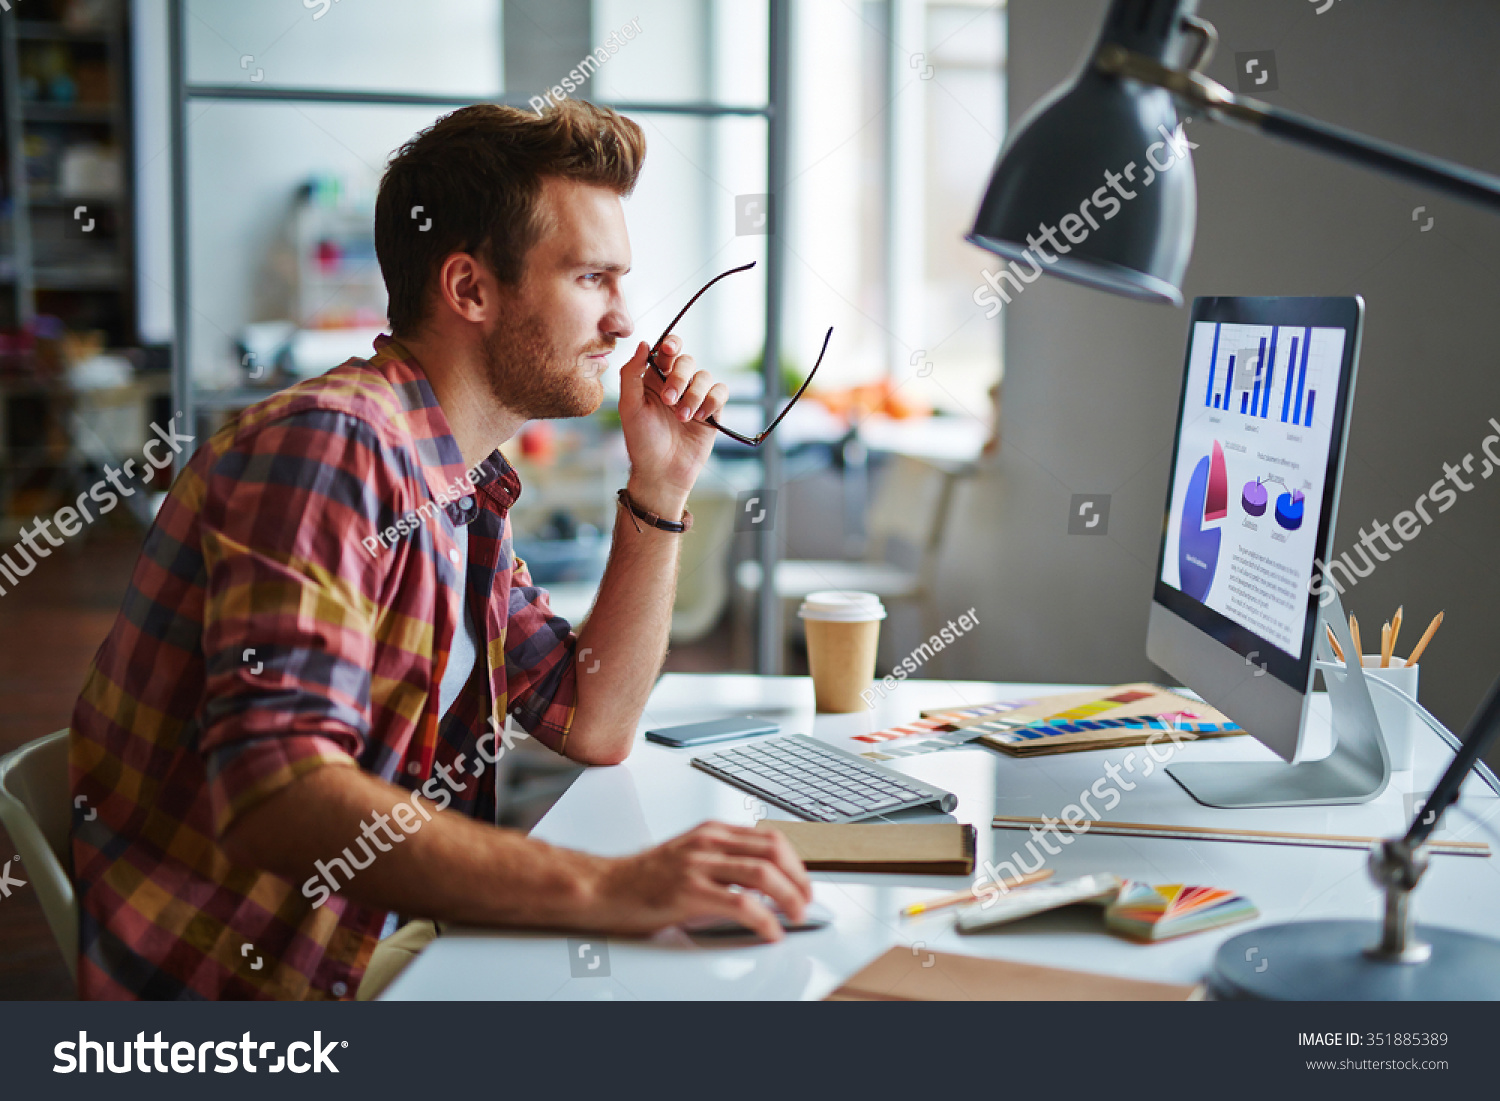 Man as a designer sitting at his table and working on computer #351885389